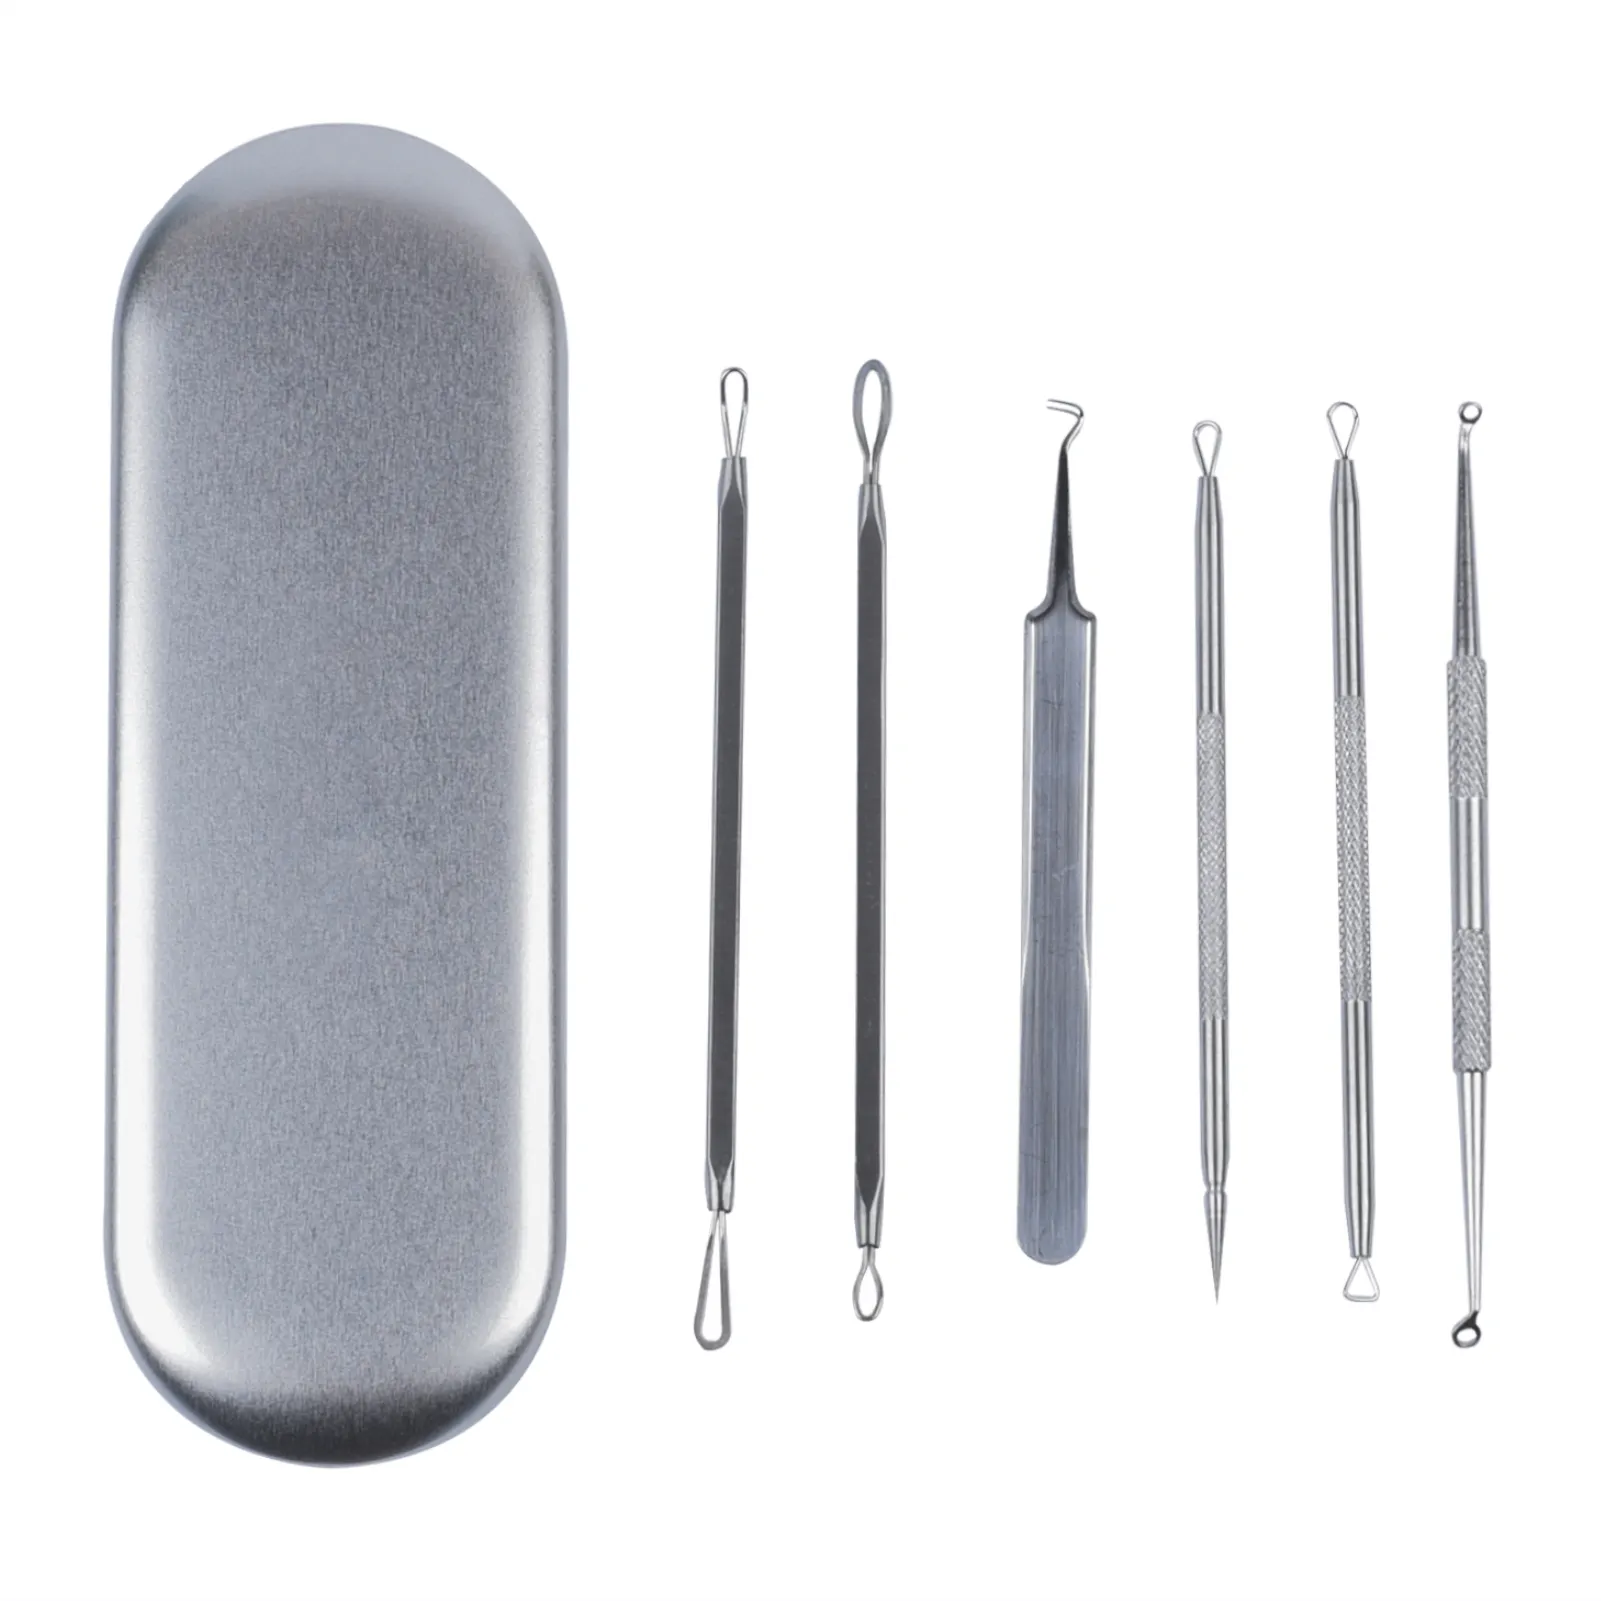 Travel Skin Care Stainless Steel Practical Pimple Popper Acne Comedone Extraction Blackhead Remover Extractor Tool Kit